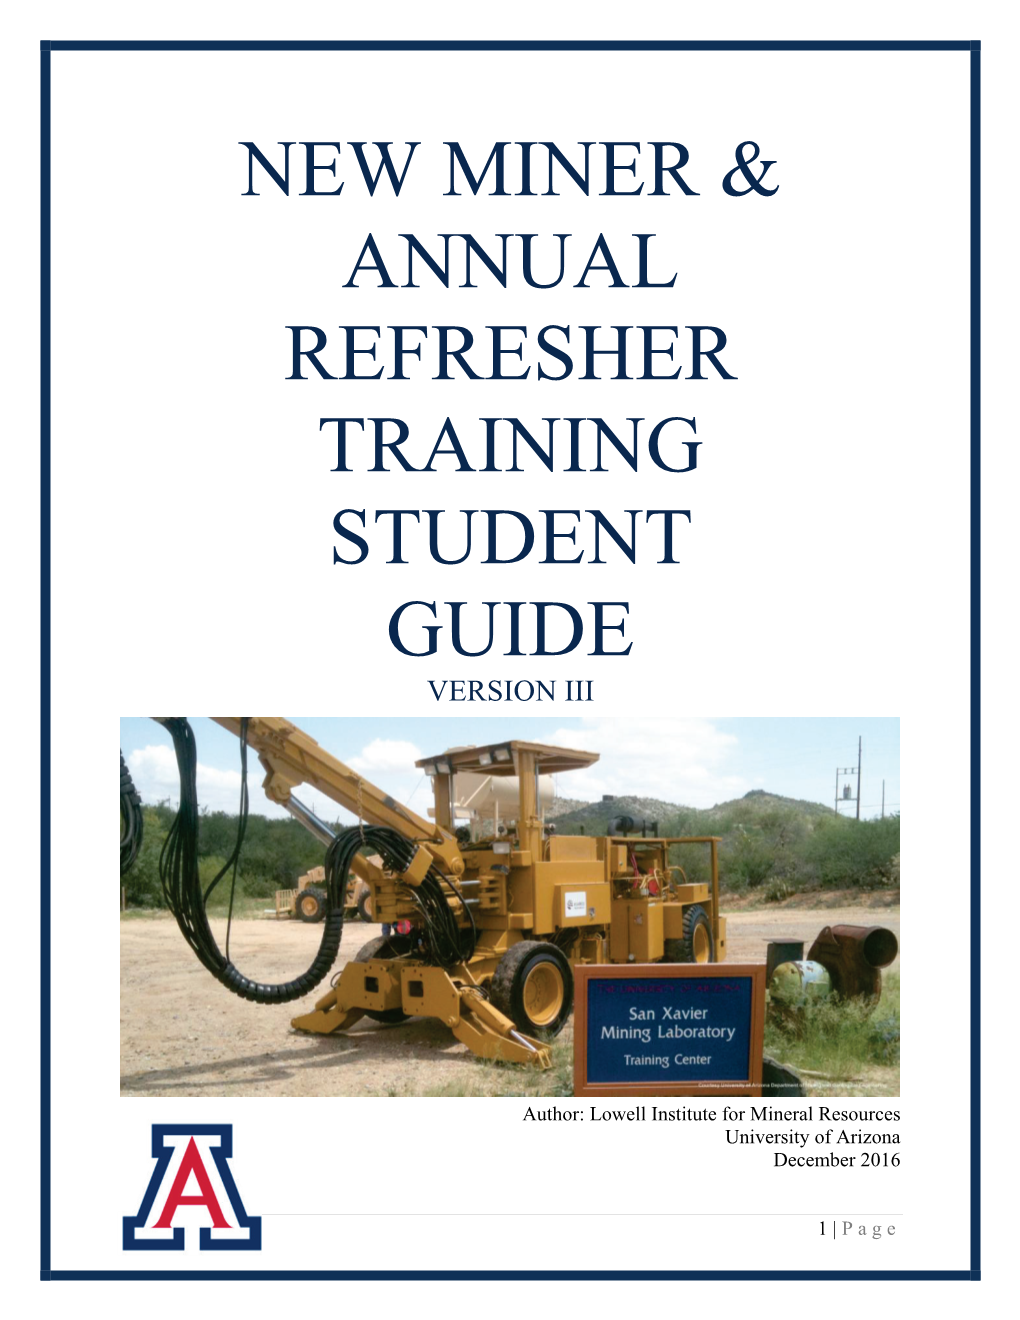 New Miner & Annual Refresher